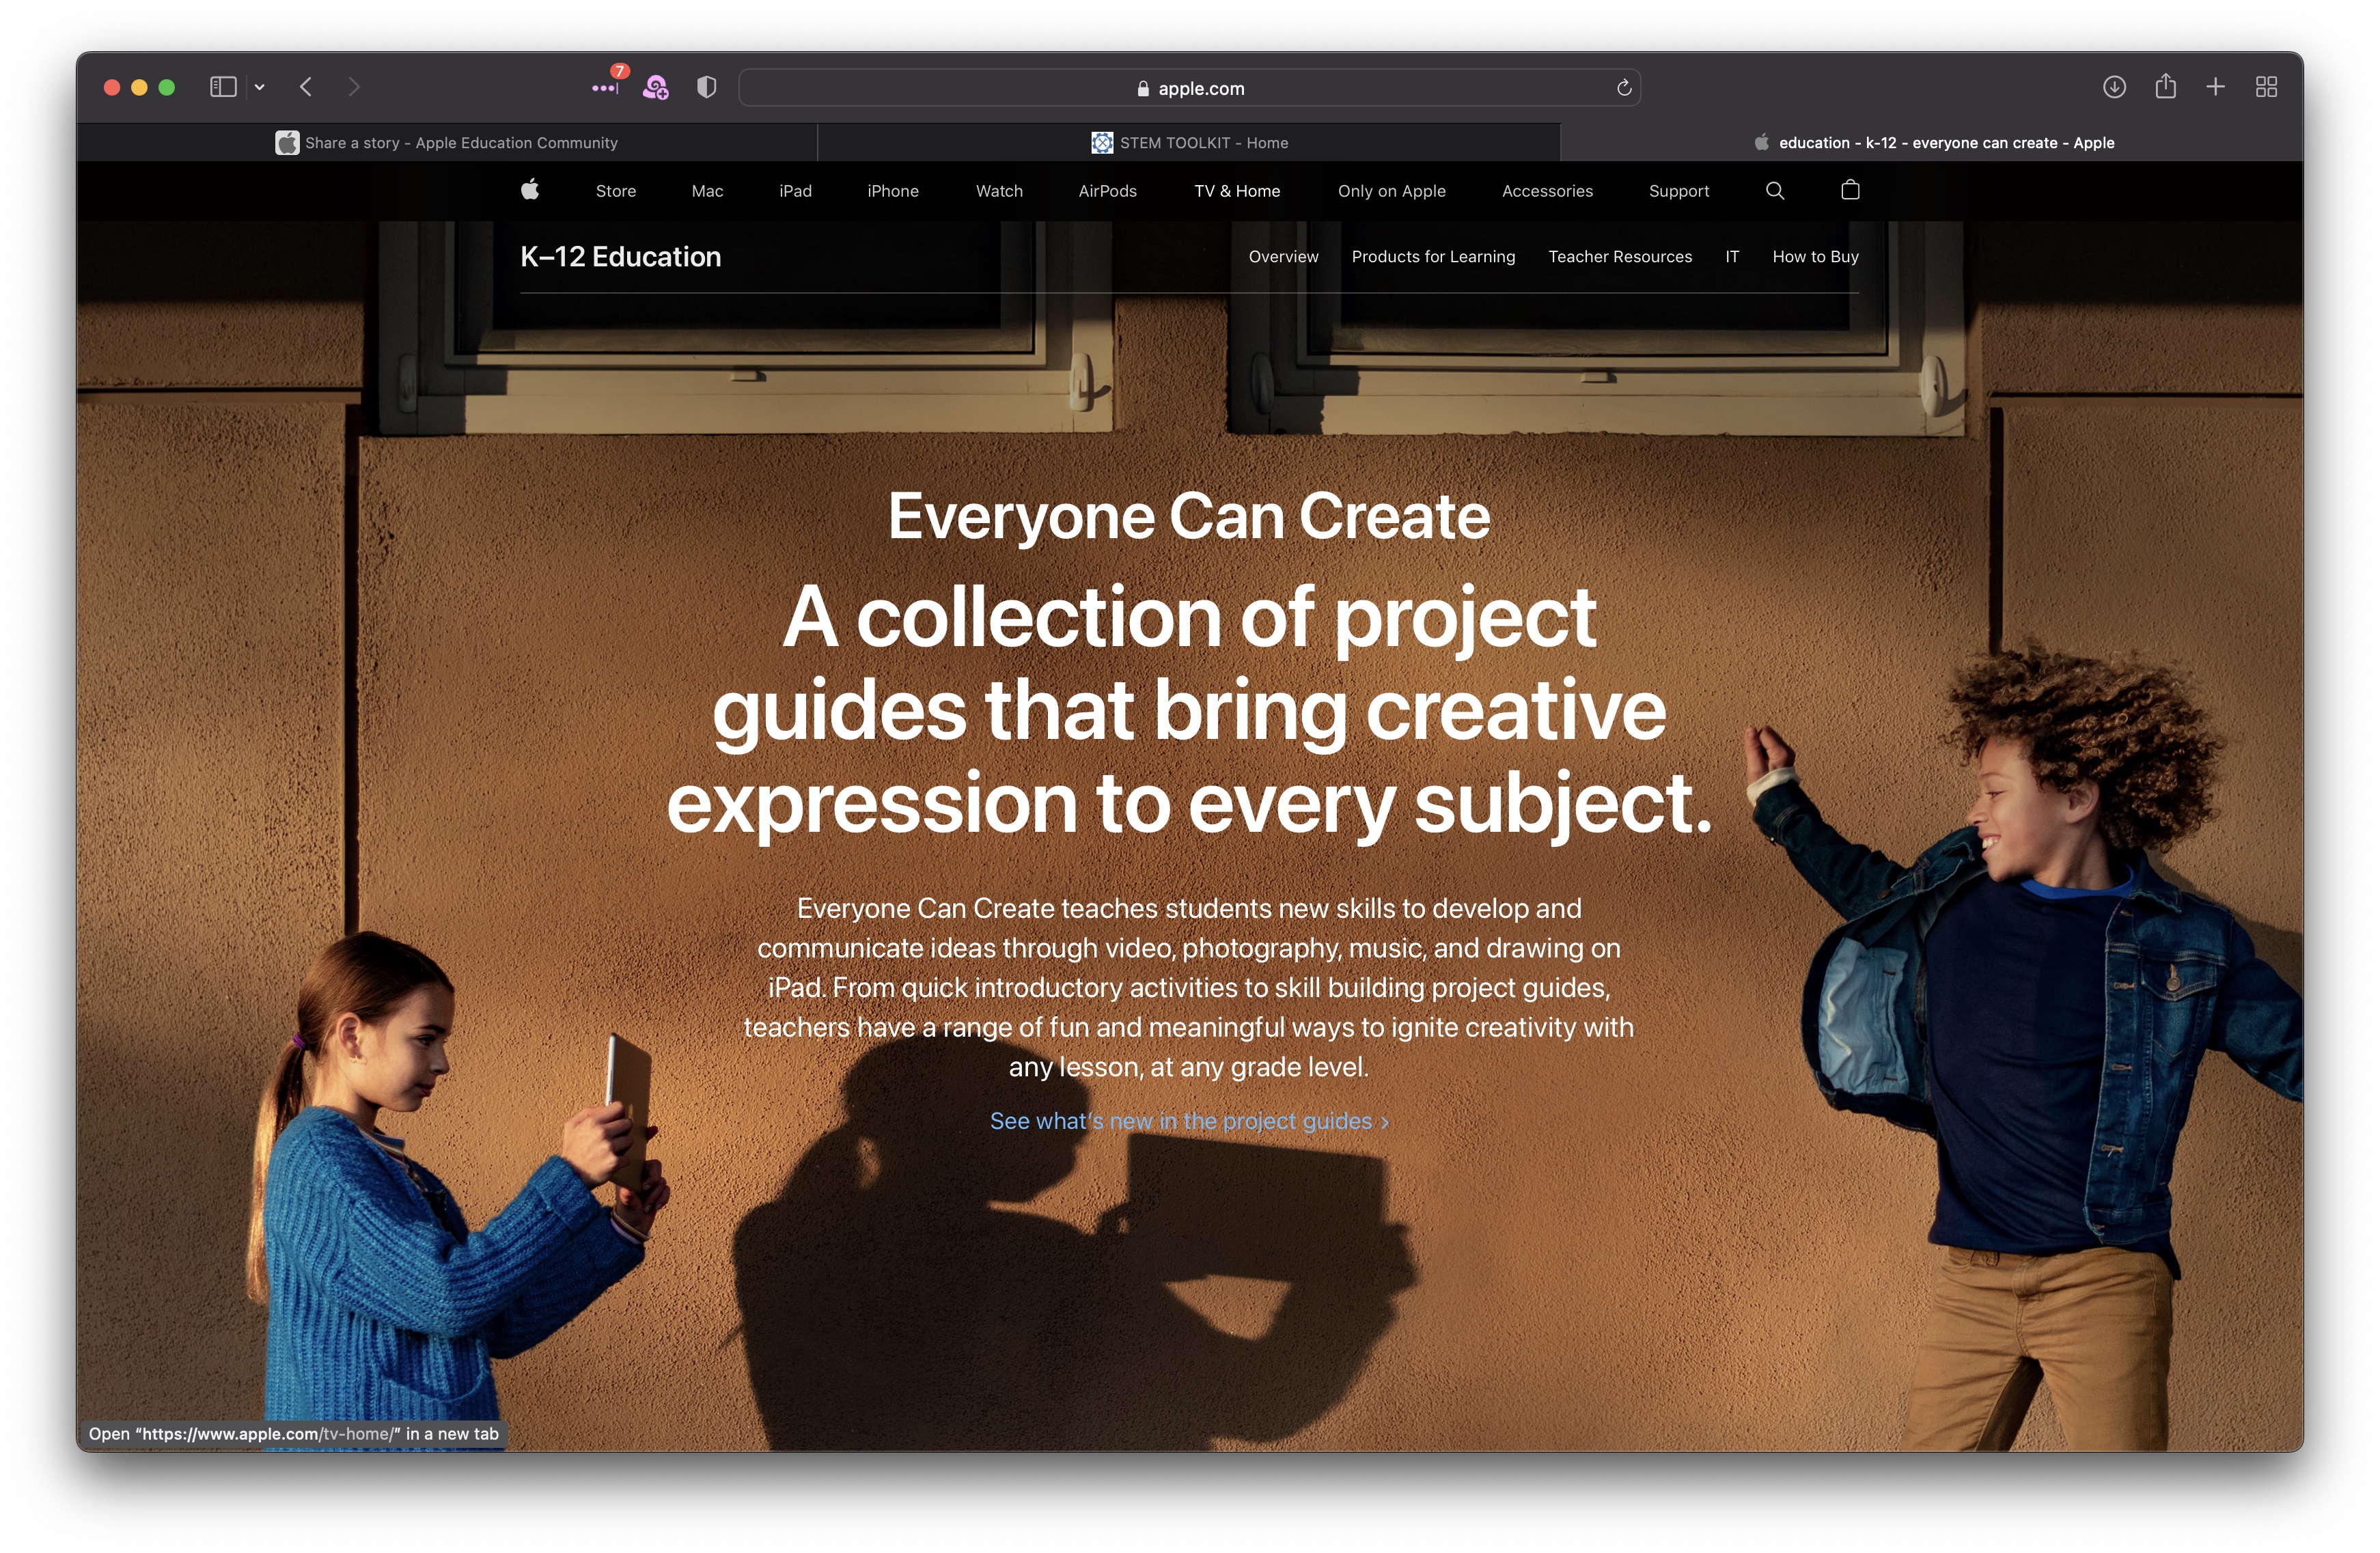 Screenshot of the Everyone Can Create homepage showing two children using an iPad to capture a scene.